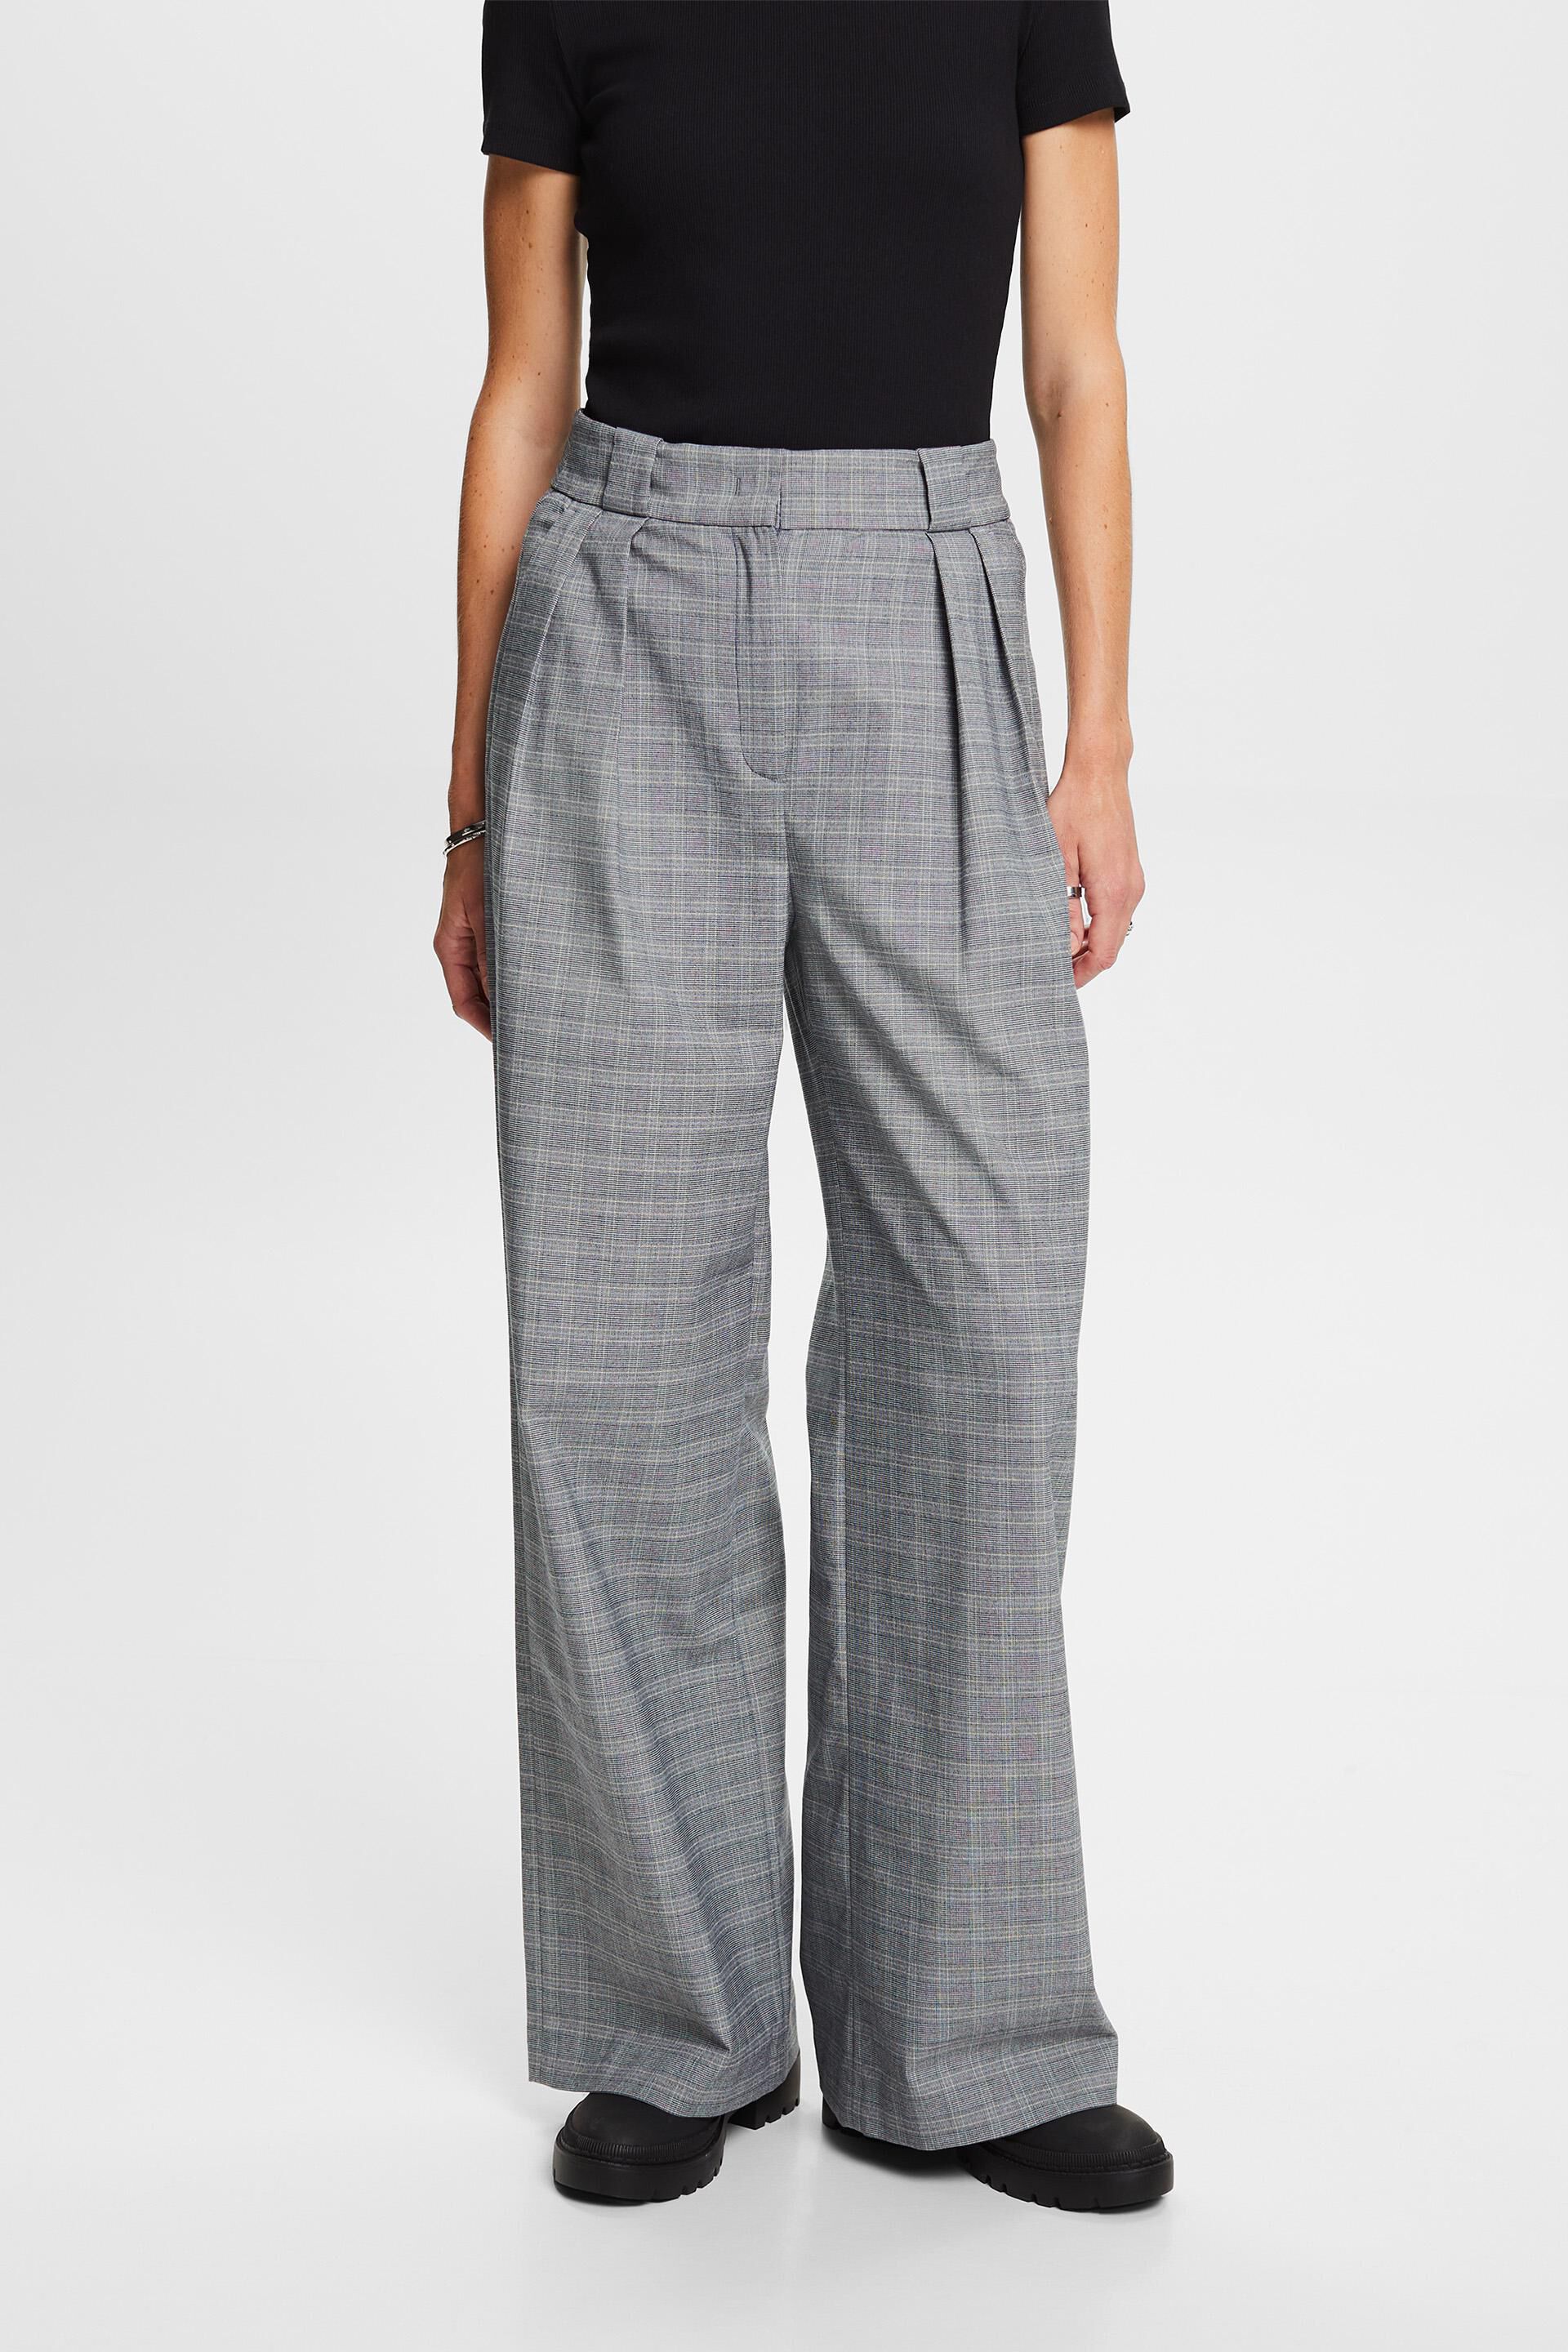 Wardrobe by Westside Grey Plaid Checked Trousers